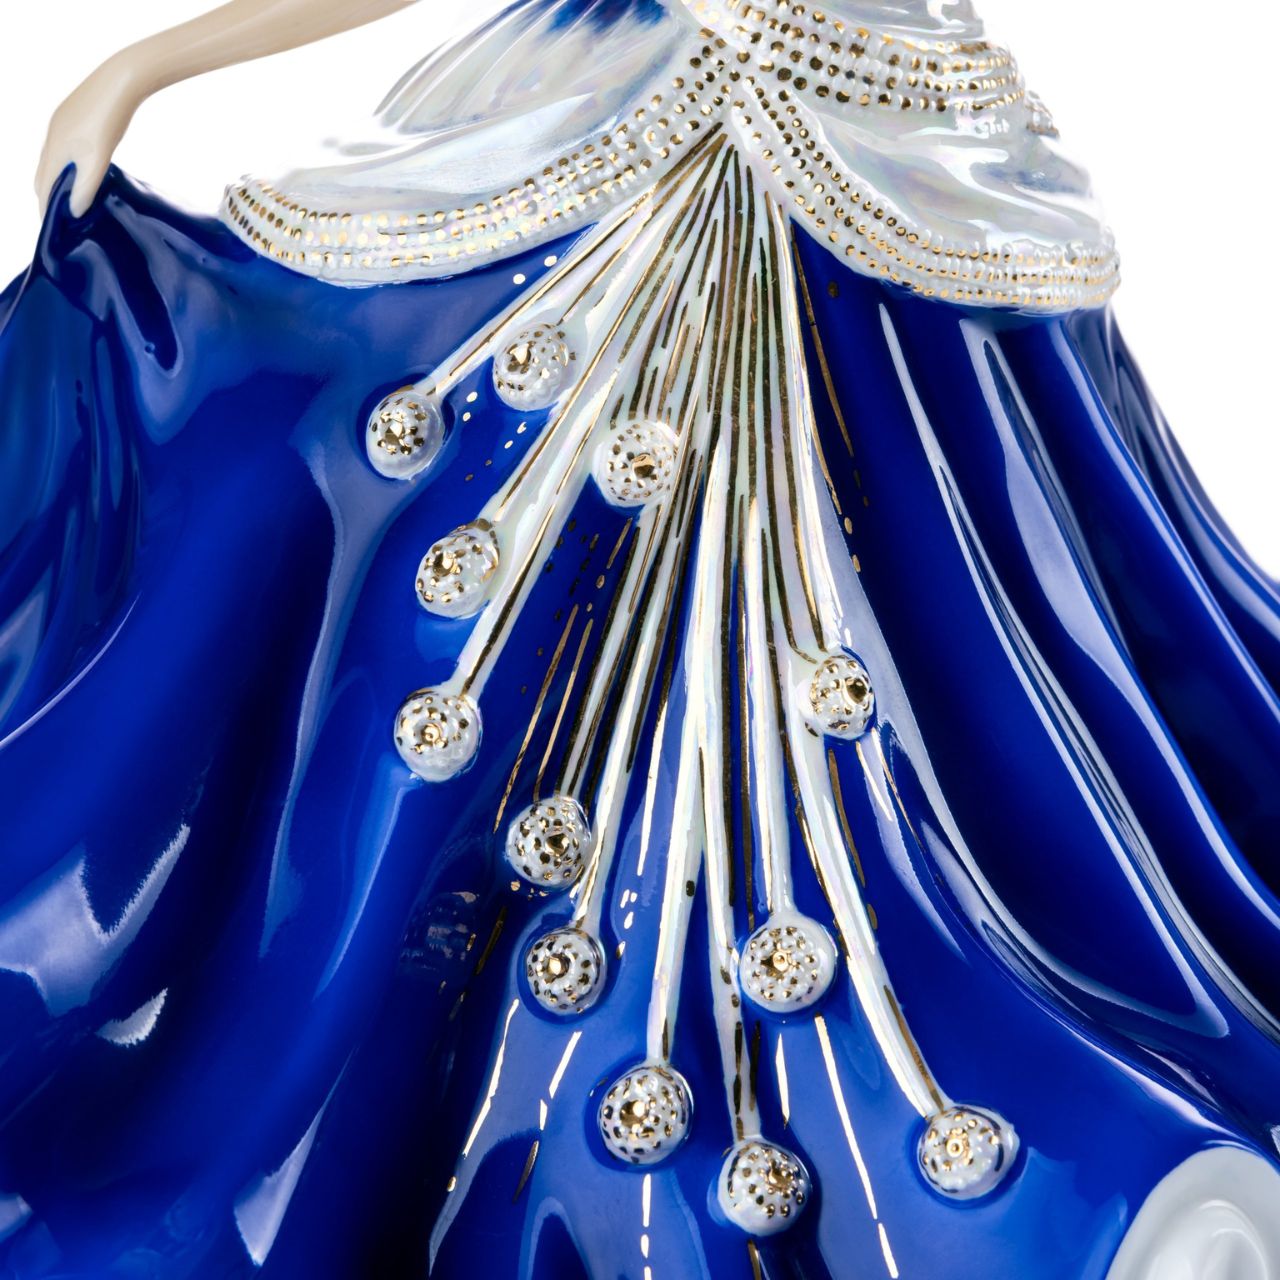 English Ladies Going to the Ball Midnight  Going to the Ball midnight is a beautifully hand-made figurine decorated in a deep royal blue colourway. This sophisticated piece is detailed with mother-of-pearl lustre and real 24-carat gold highlights that glisten when hit by the light.